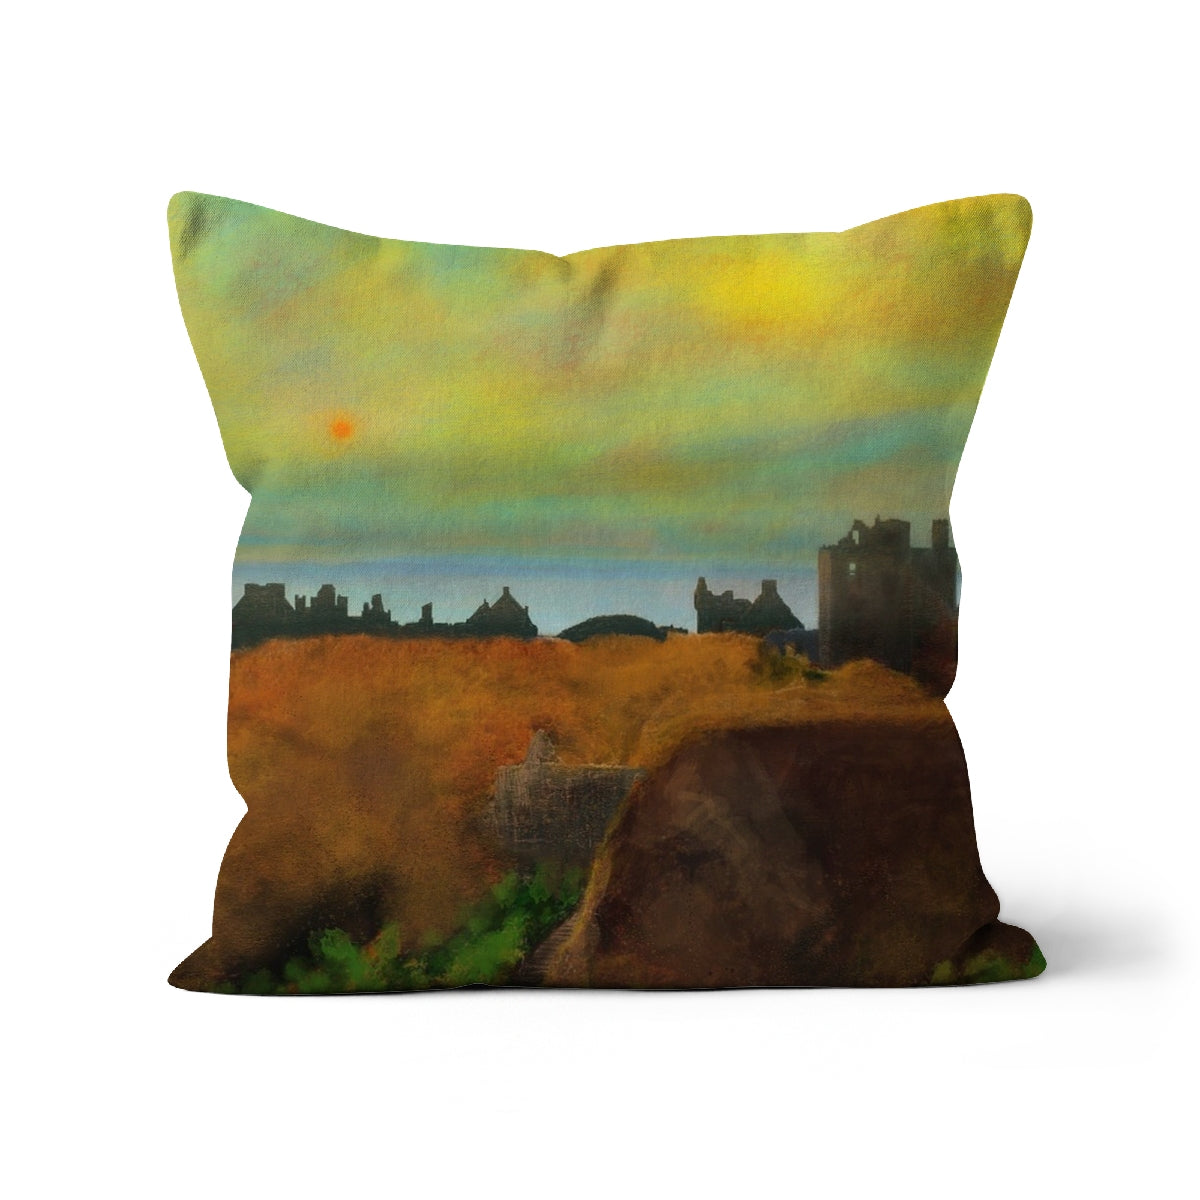 Dunnottar Castle Art Gifts Cushion-Cushions-Historic & Iconic Scotland Art Gallery-Faux Suede-24"x24"-Paintings, Prints, Homeware, Art Gifts From Scotland By Scottish Artist Kevin Hunter